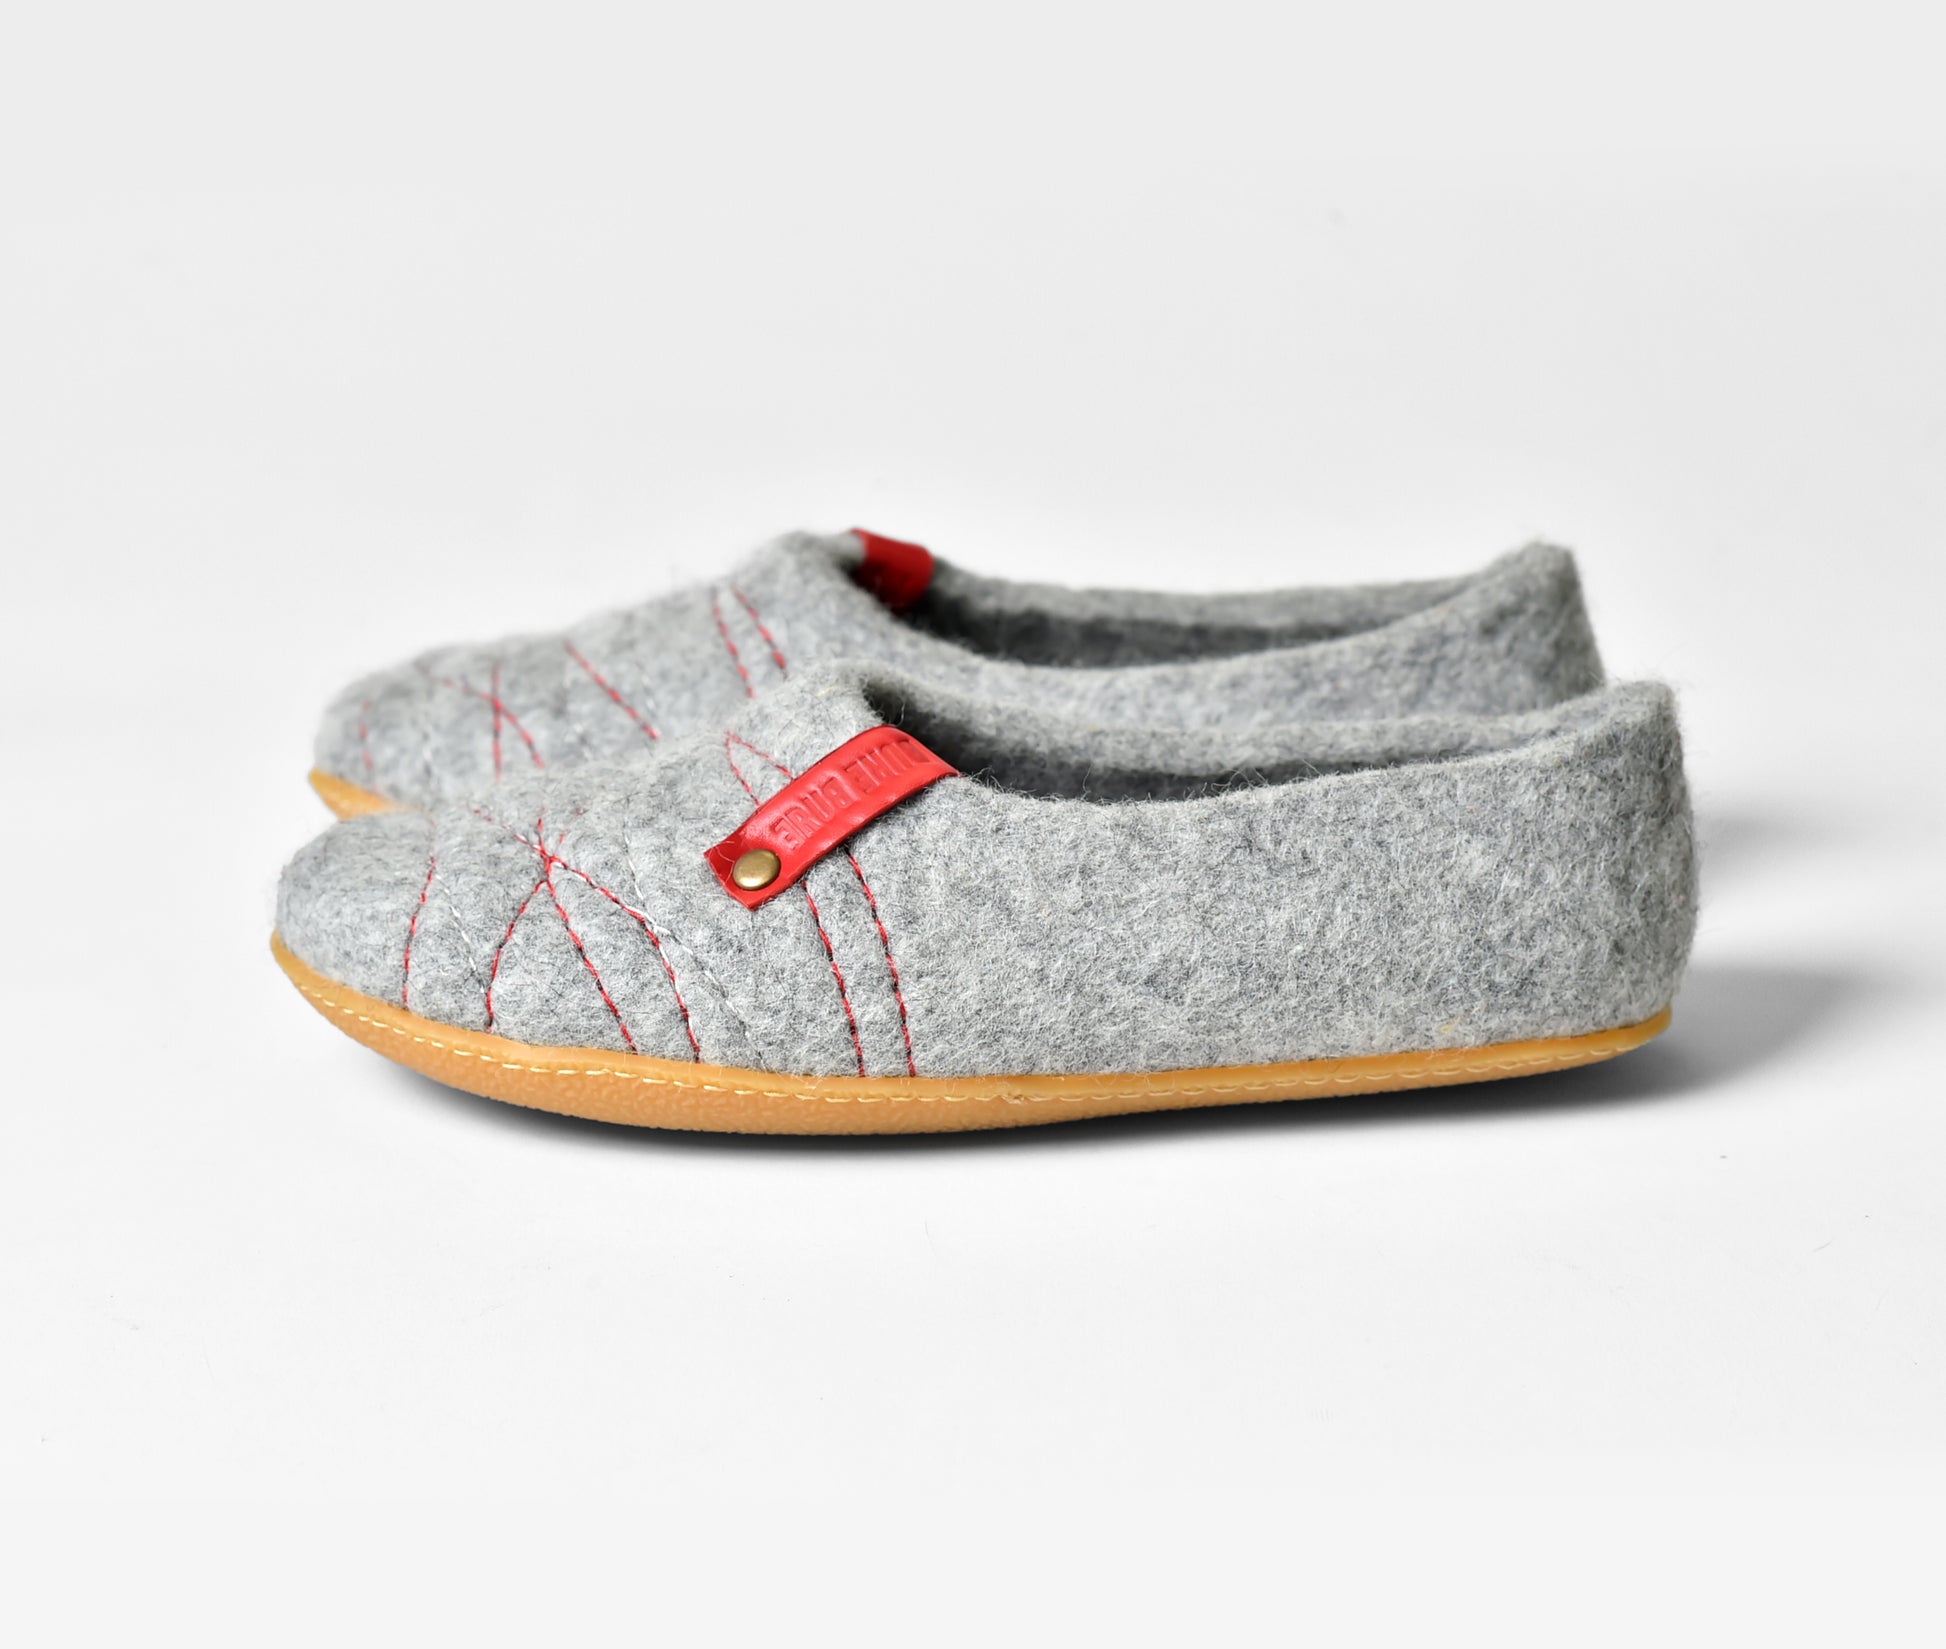 Warm Woolen Slippers for Women from BureBure Cocoon Collection, Handmade Felted Wool, Recycled Leather, Red Stitches